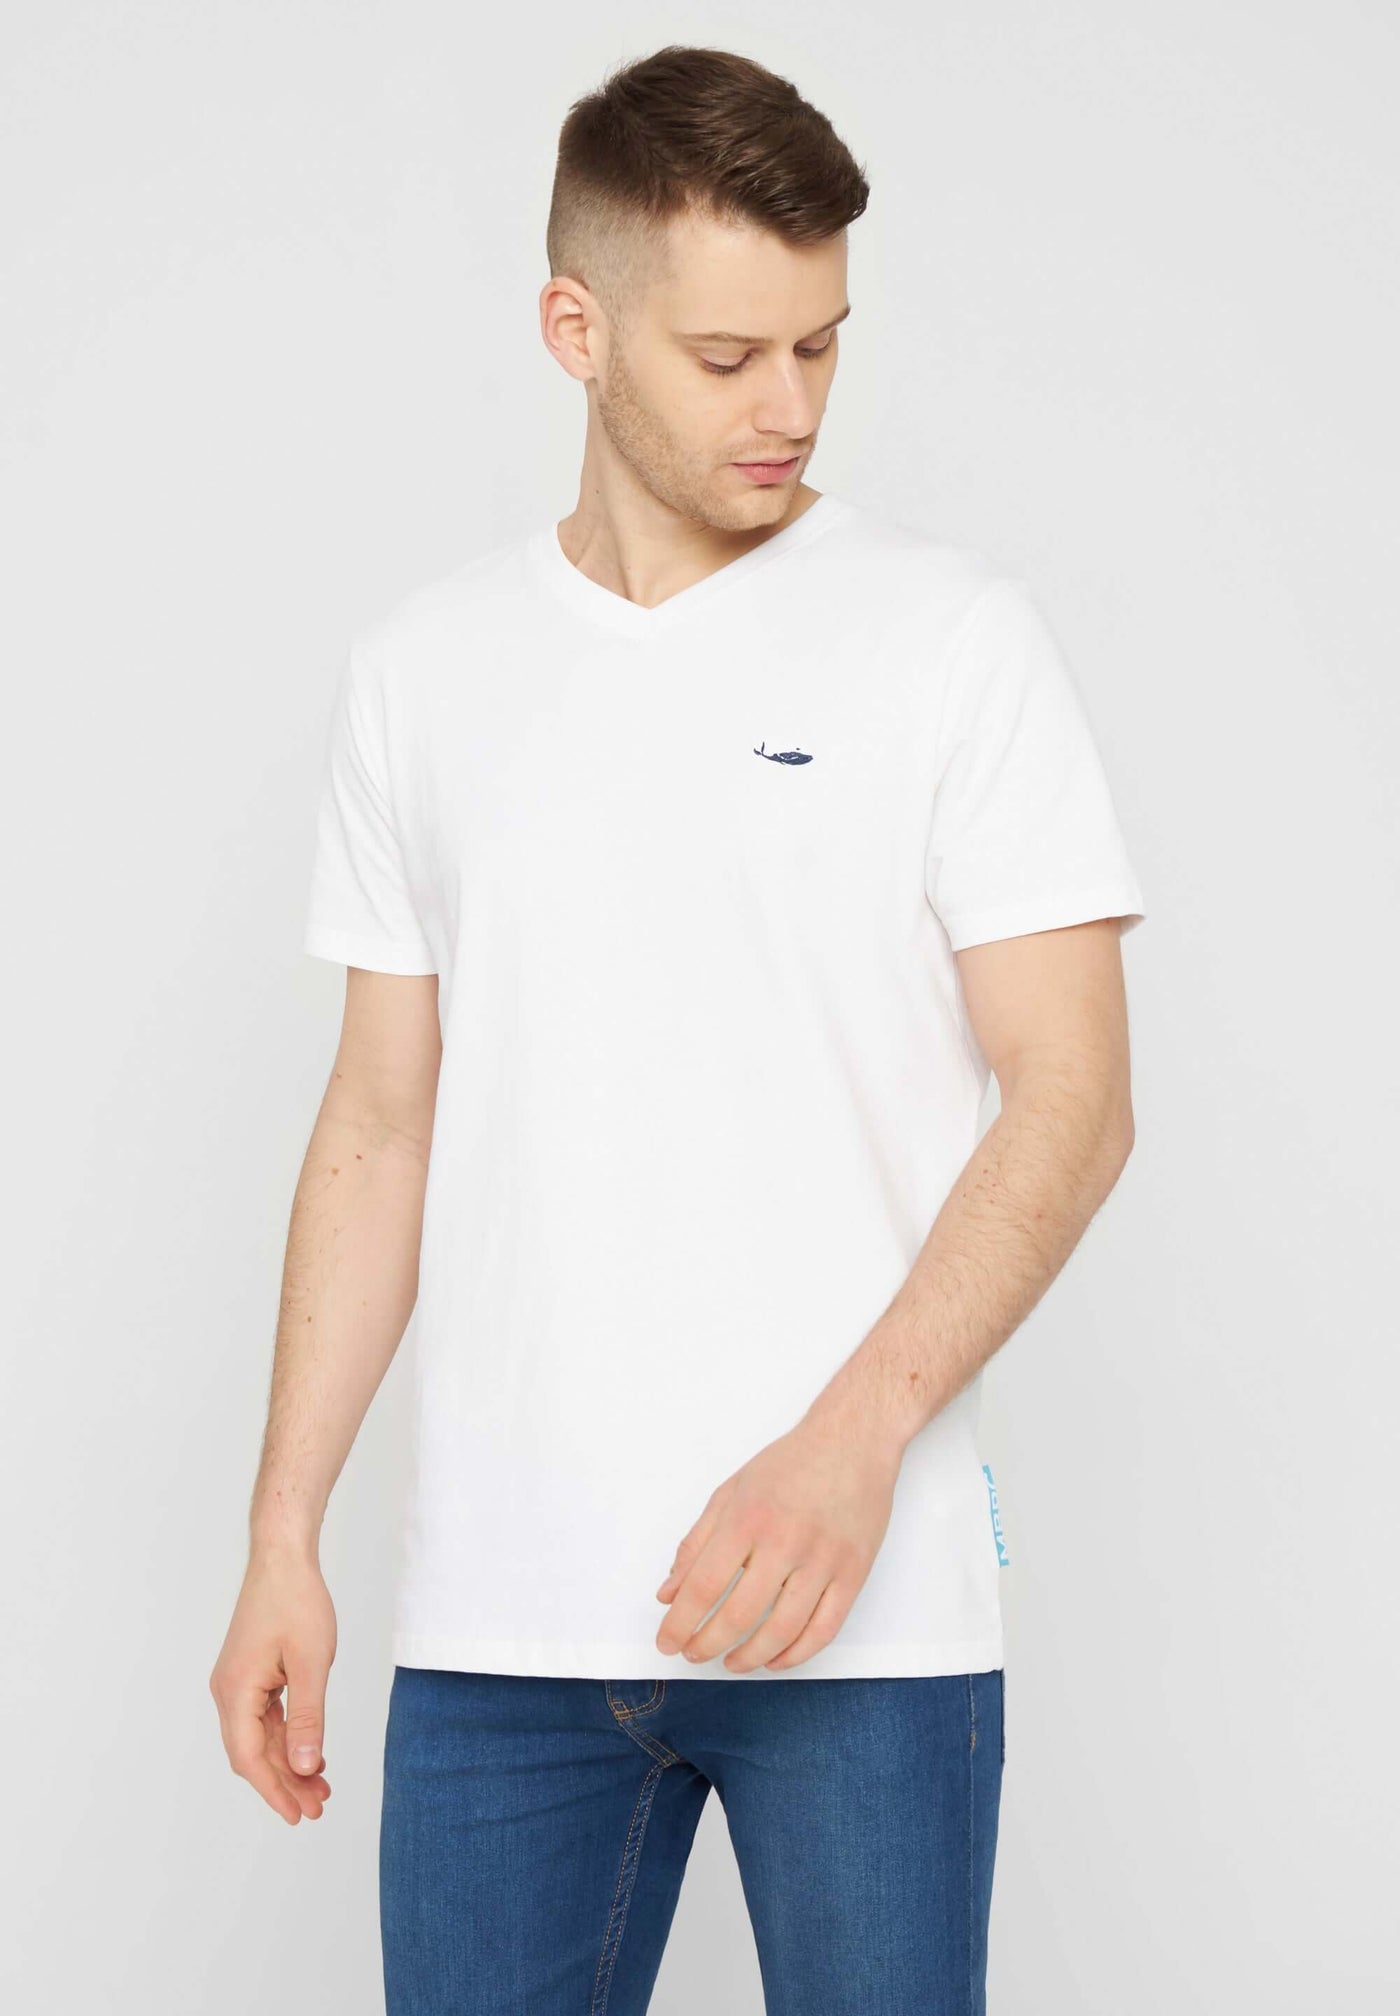 MBRC MEN SUSTAINABLE WHITE T-SHIRT "DARK BLUE LOGO" - FRONTAL VIEW